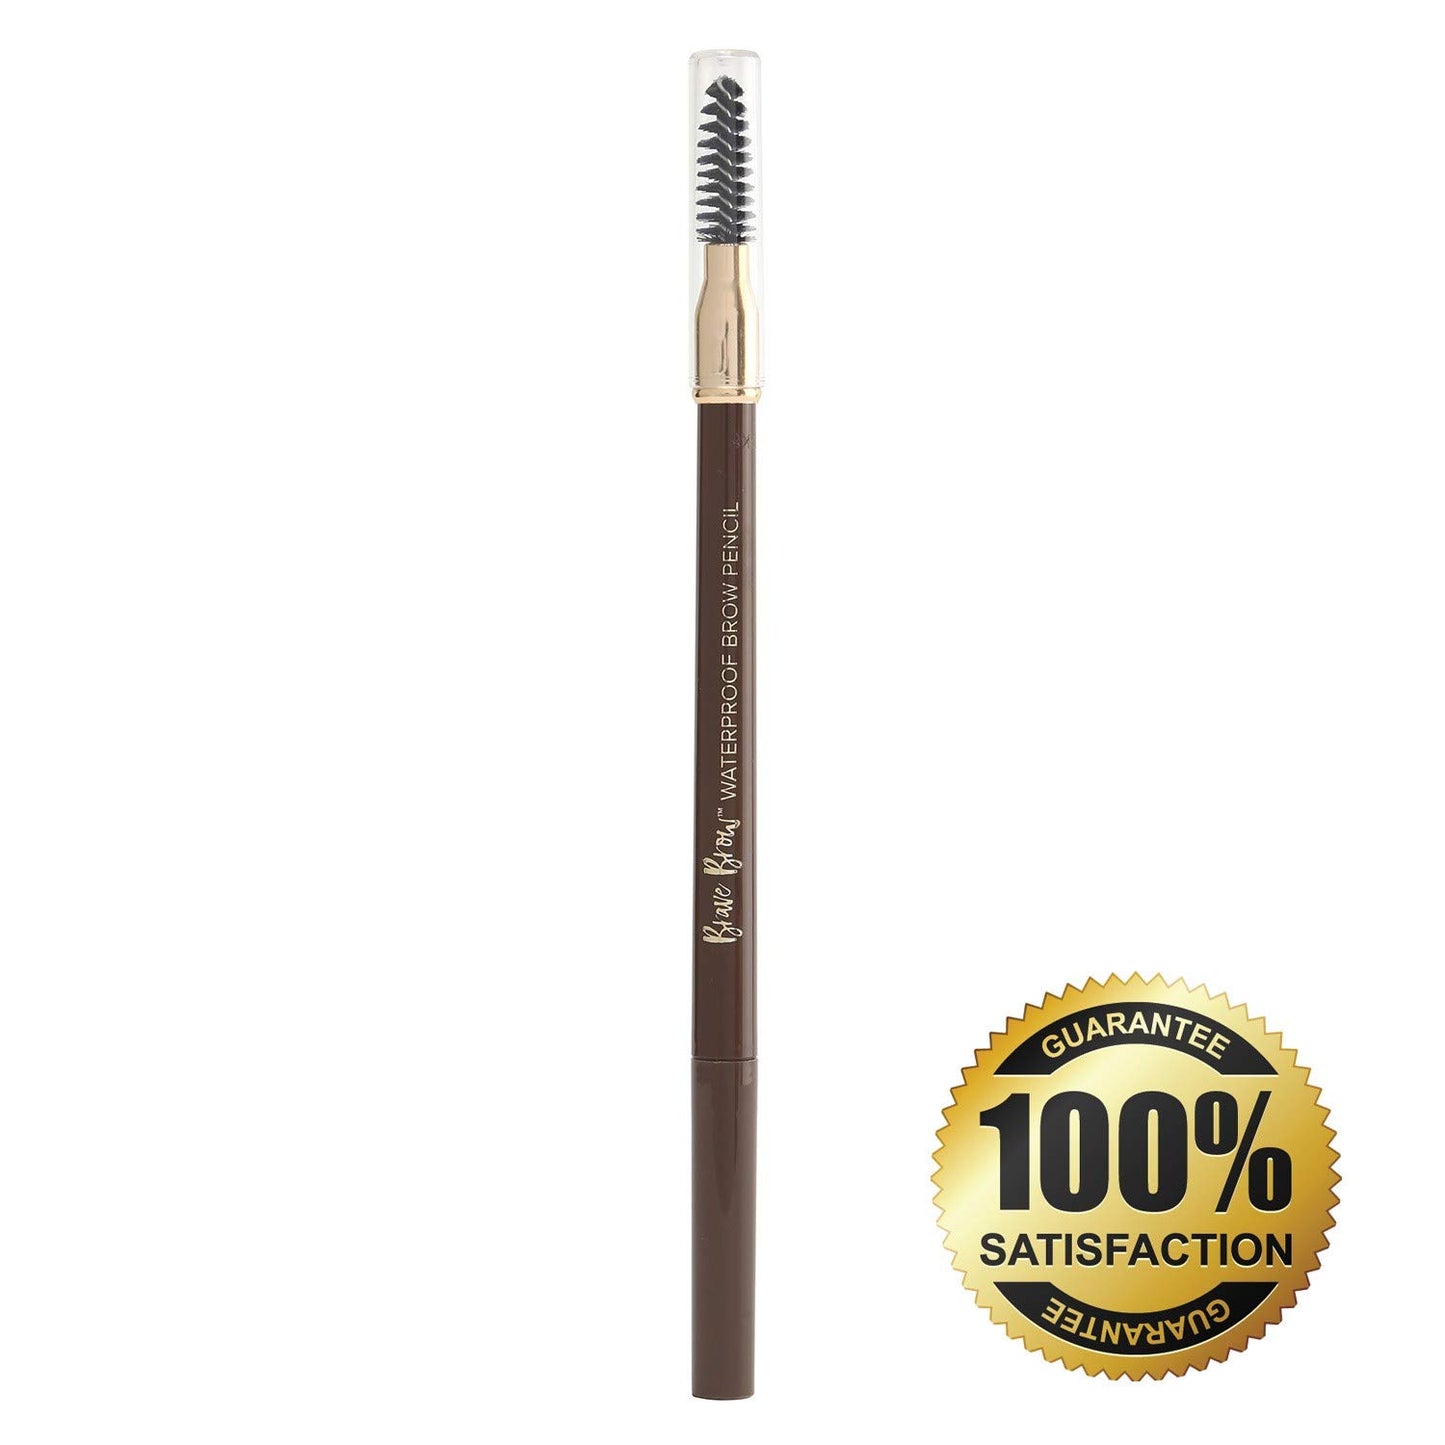 by Kim Gravel Brave Brow Eyebrow Pencil (Soft Brown) - Bold Rich Beautiful Eyebrow Color